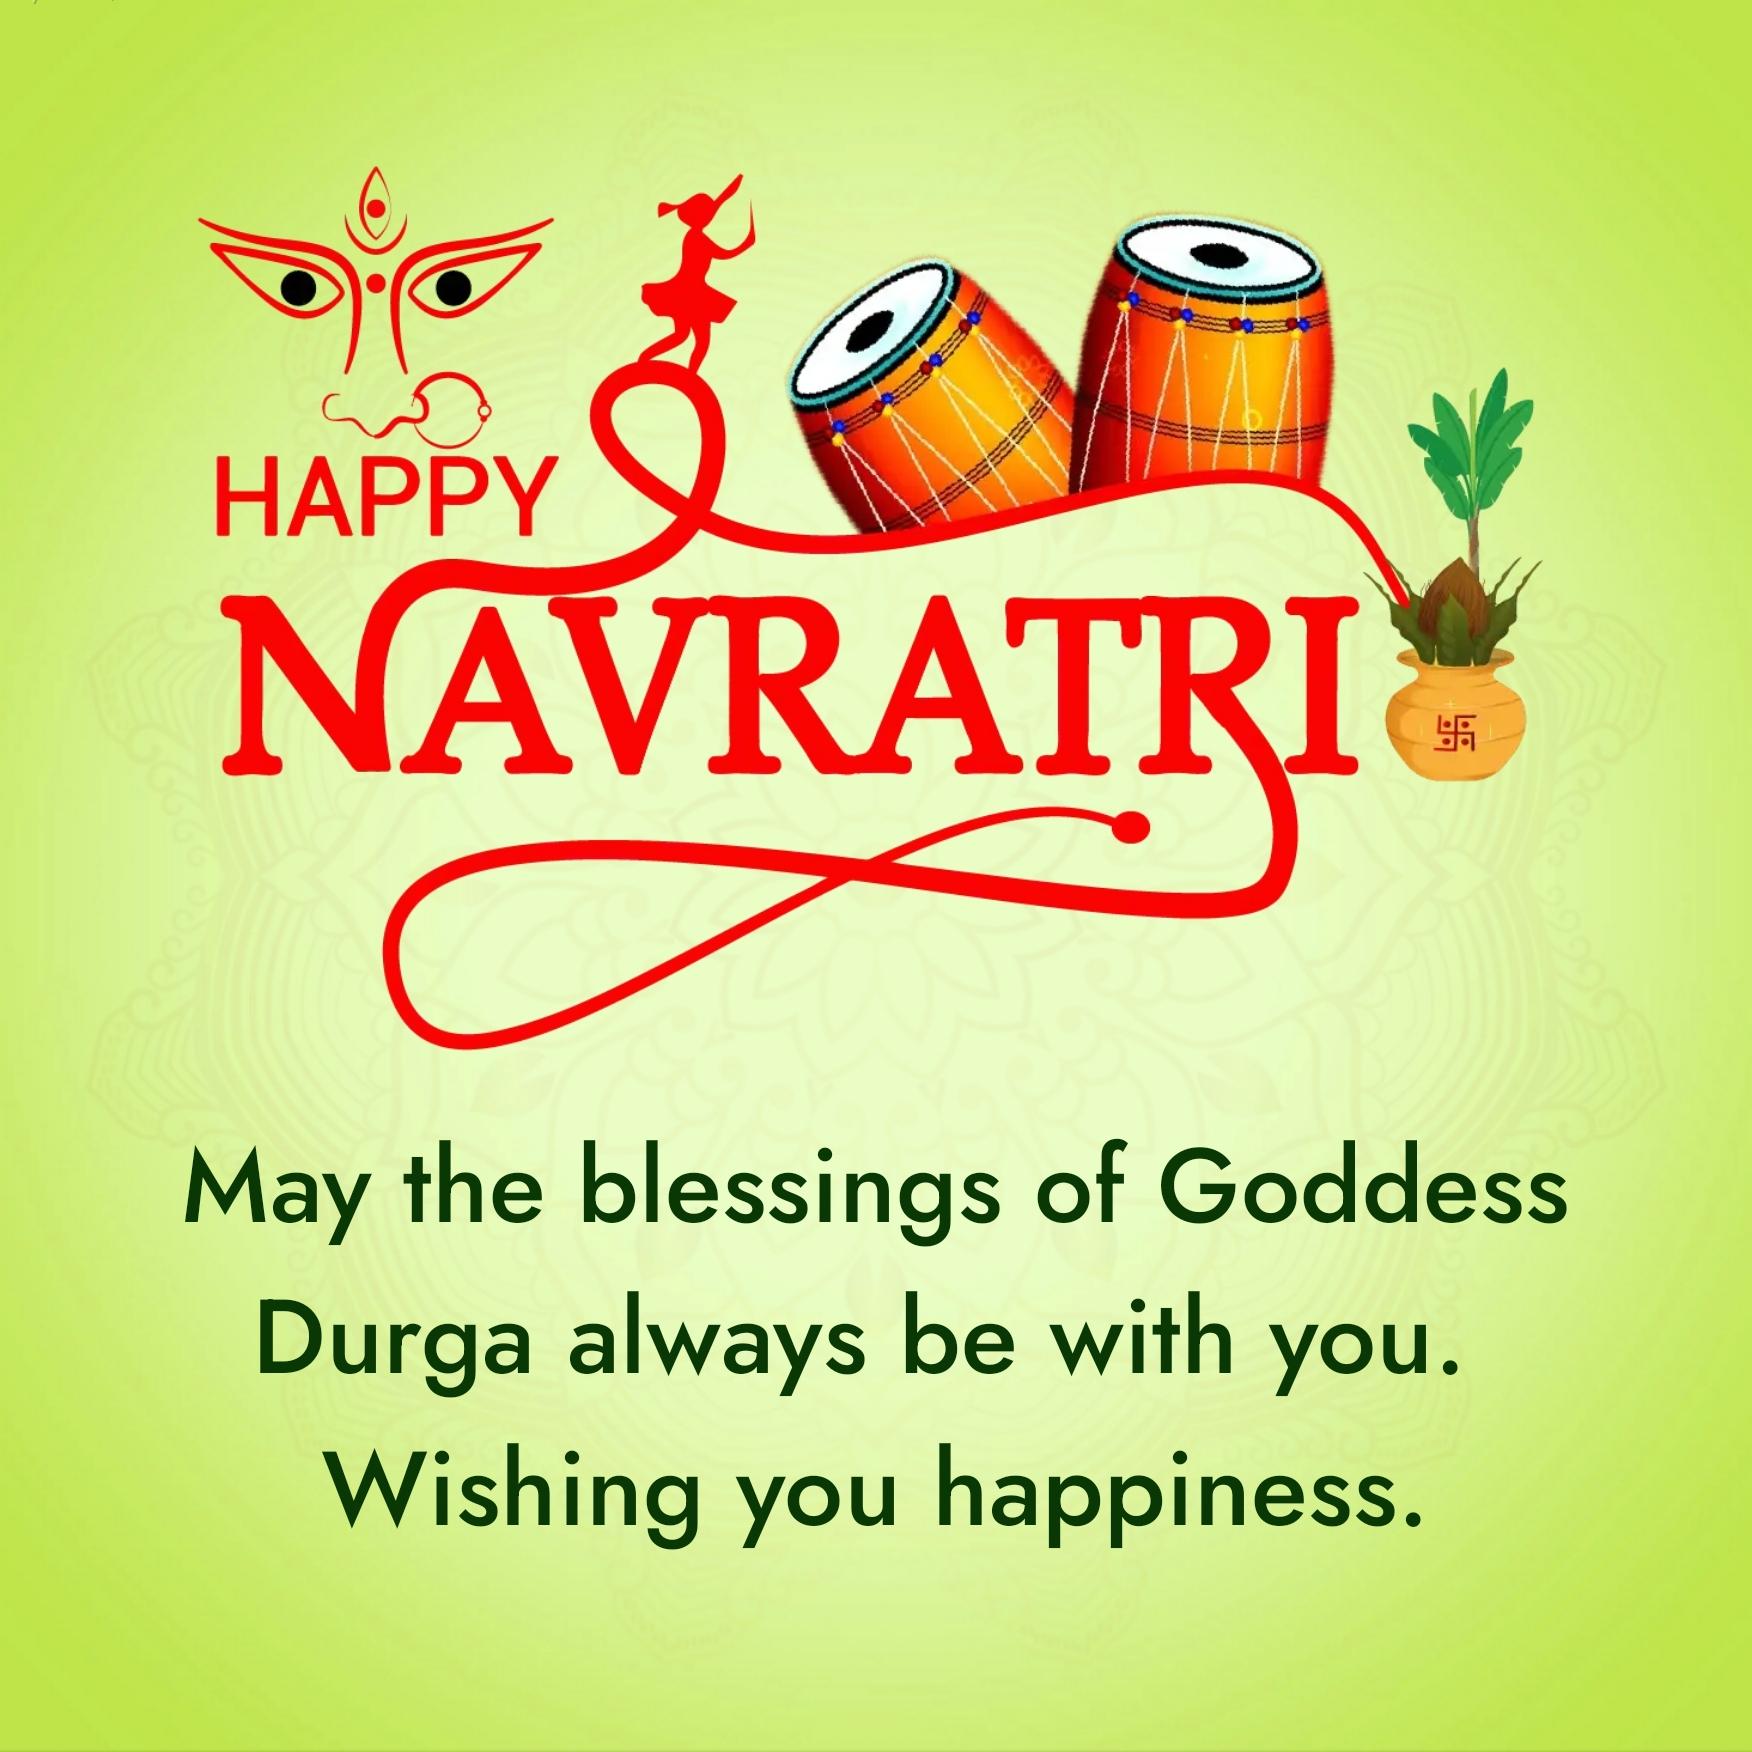 May the blessings of Goddess Durga always be with you